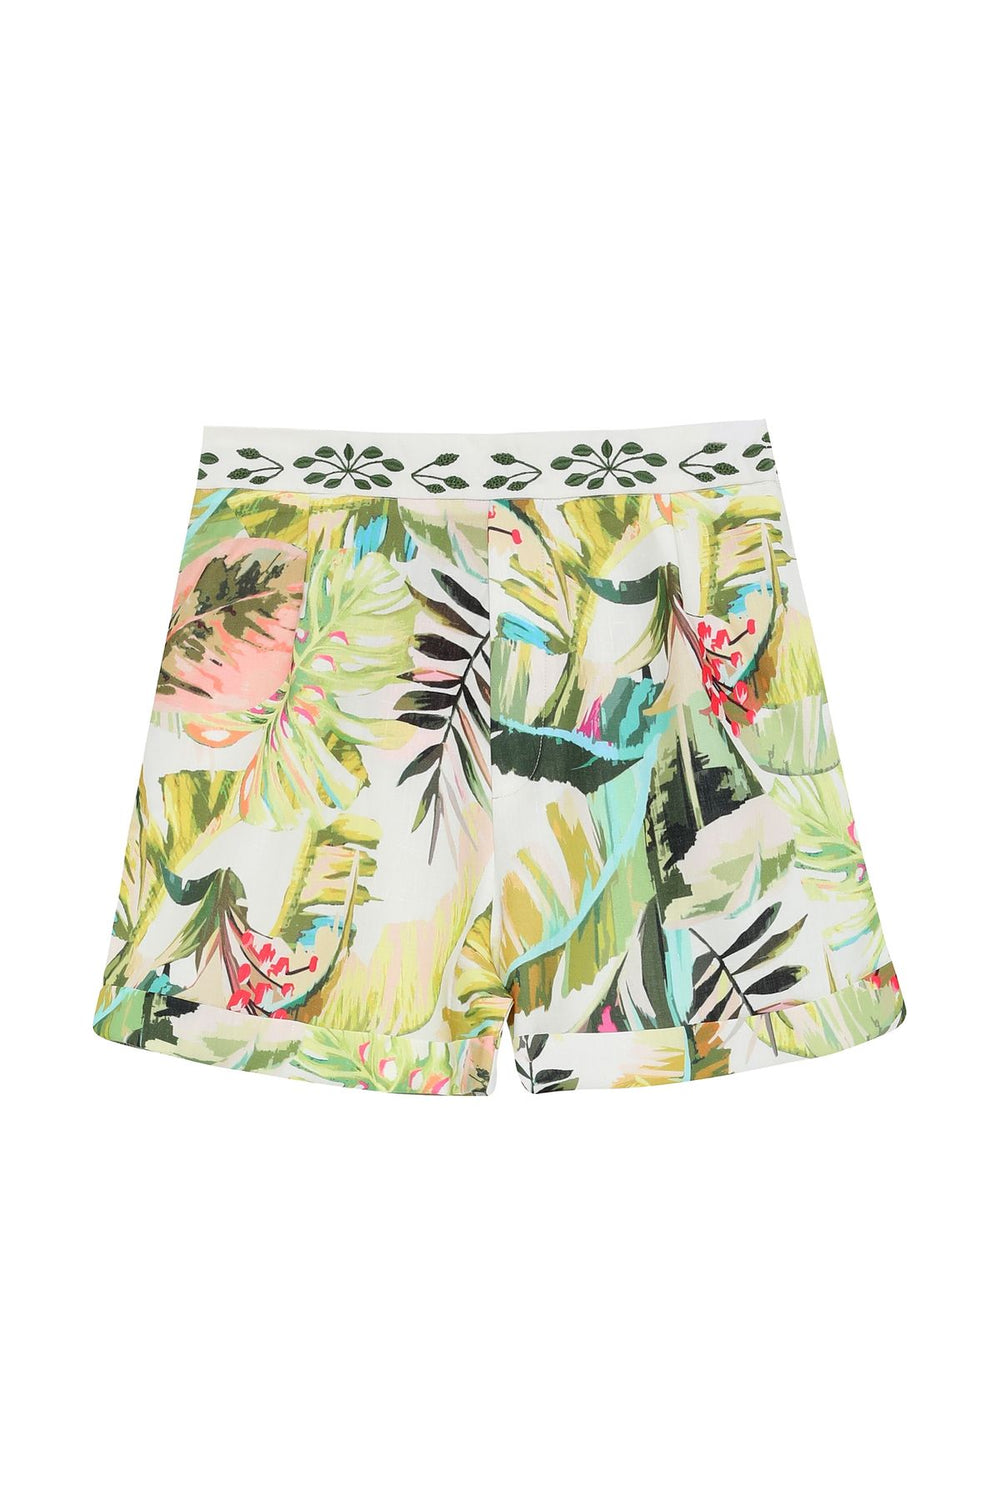 Colorful Patterned High Waist Mini Shorts Green